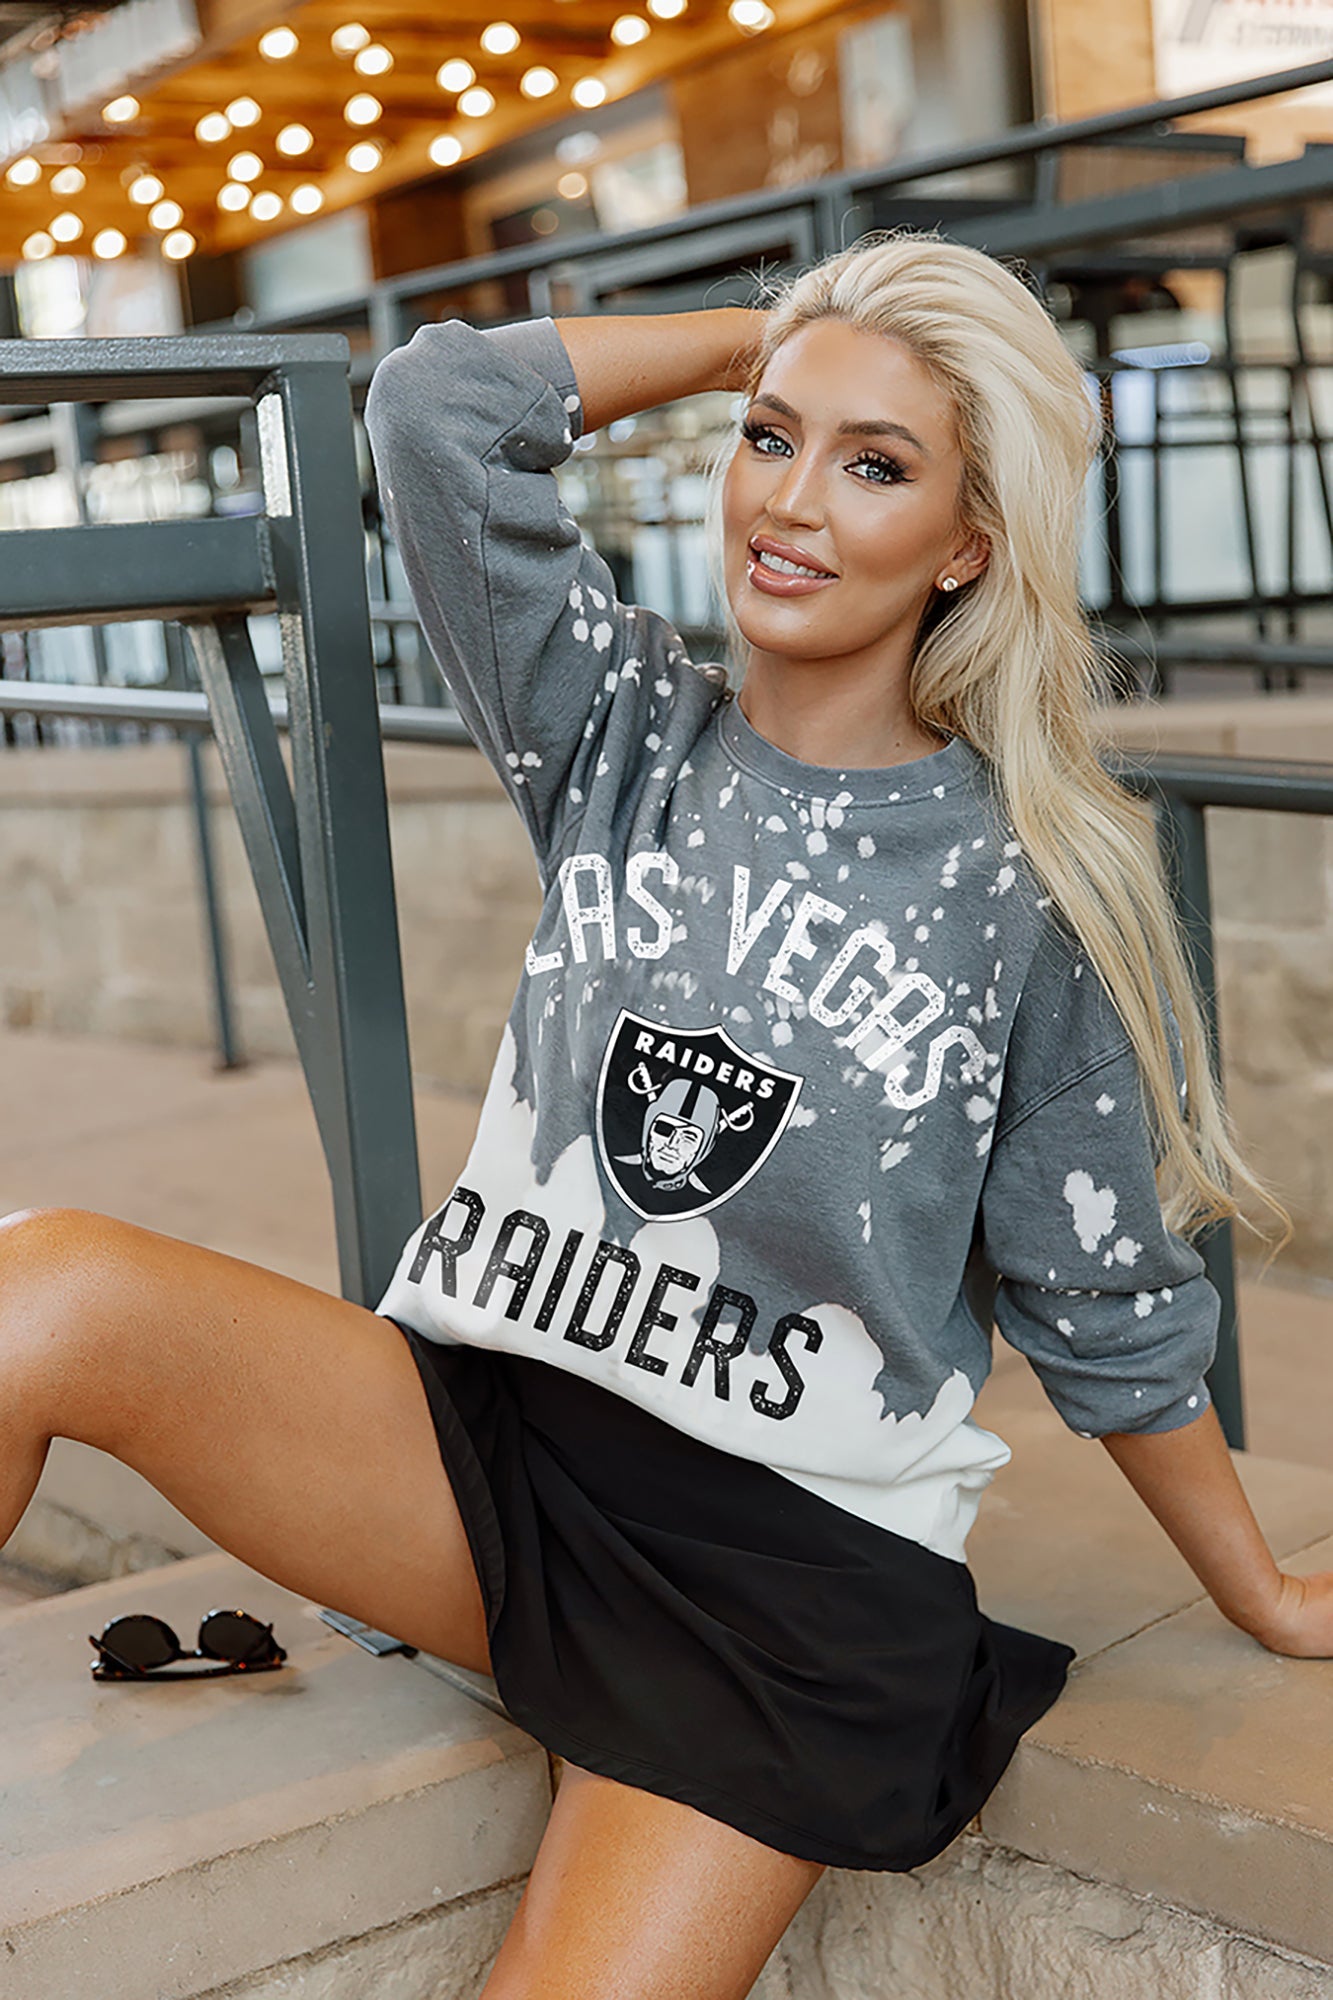 Women's Gameday Couture Gray Las Vegas Raiders Tackle Titan Boyfriend Washed T-Shirt Size: Large